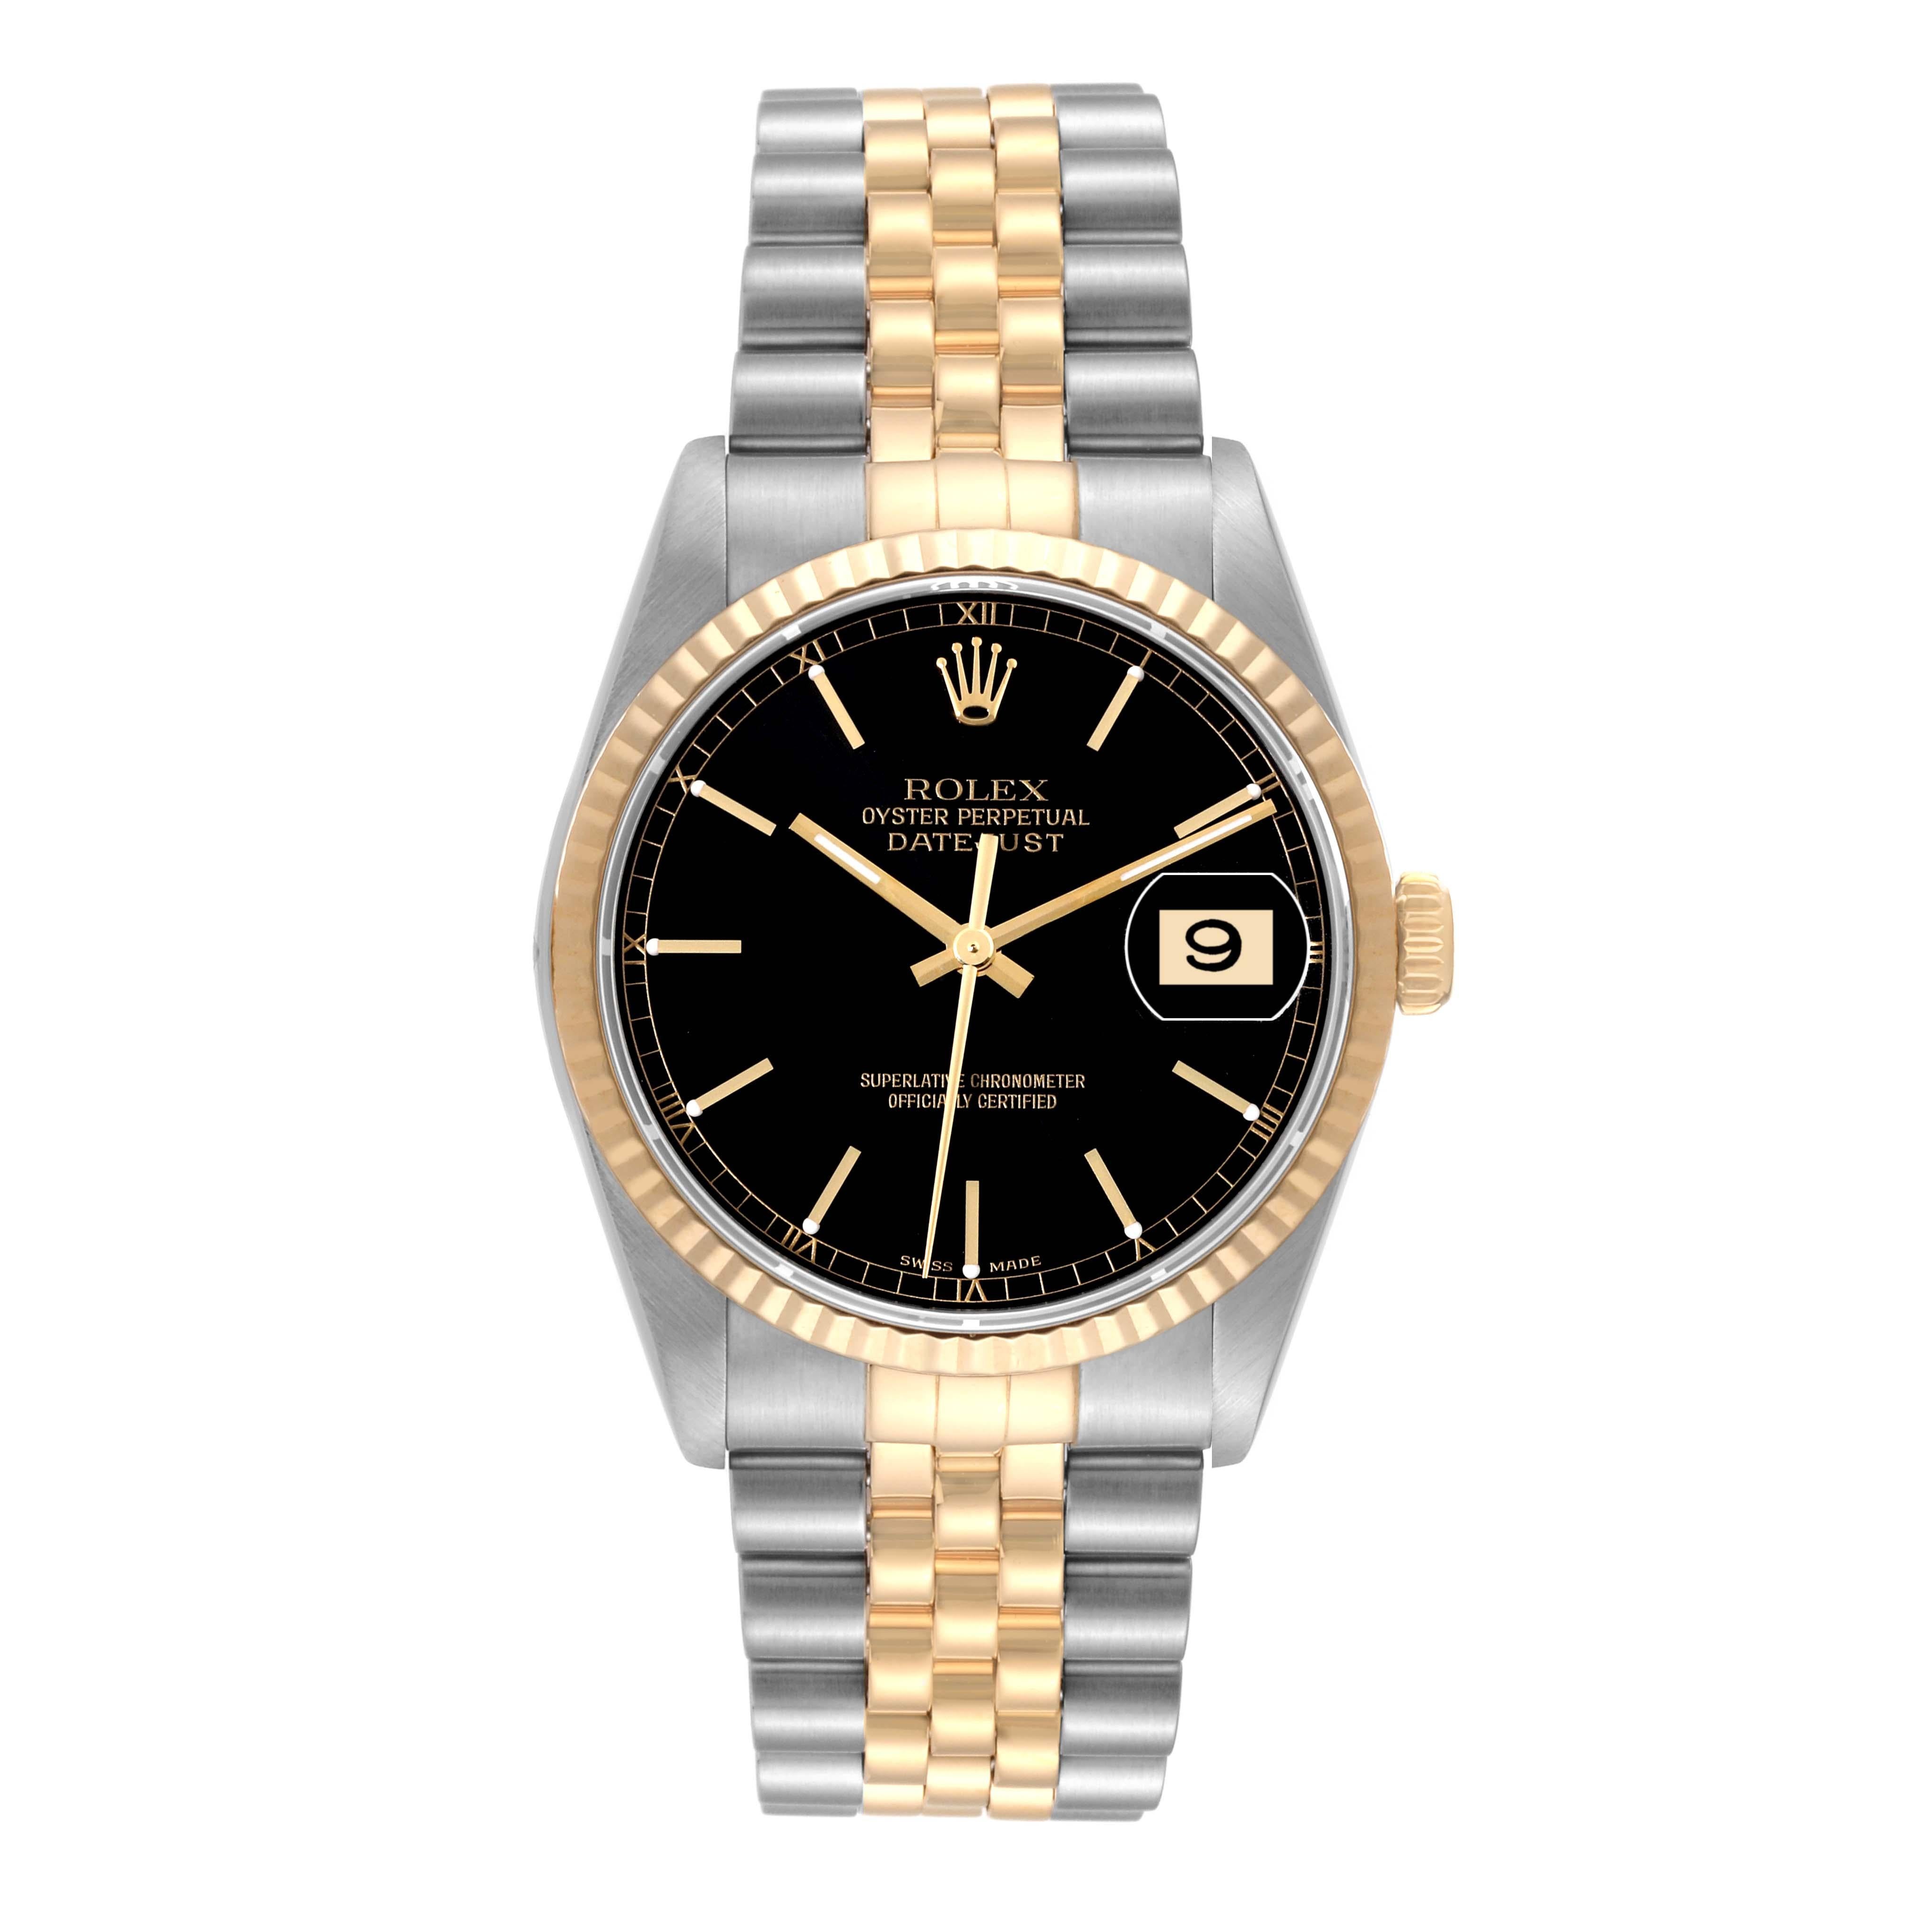 Rolex Datejust 36 Steel Yellow Gold Black Dial Mens Watch 16233 Box Papers. Officially certified chronometer automatic self-winding movement. Stainless steel case 36 mm in diameter.  Rolex logo on an 18K yellow gold crown. 18k yellow gold fluted